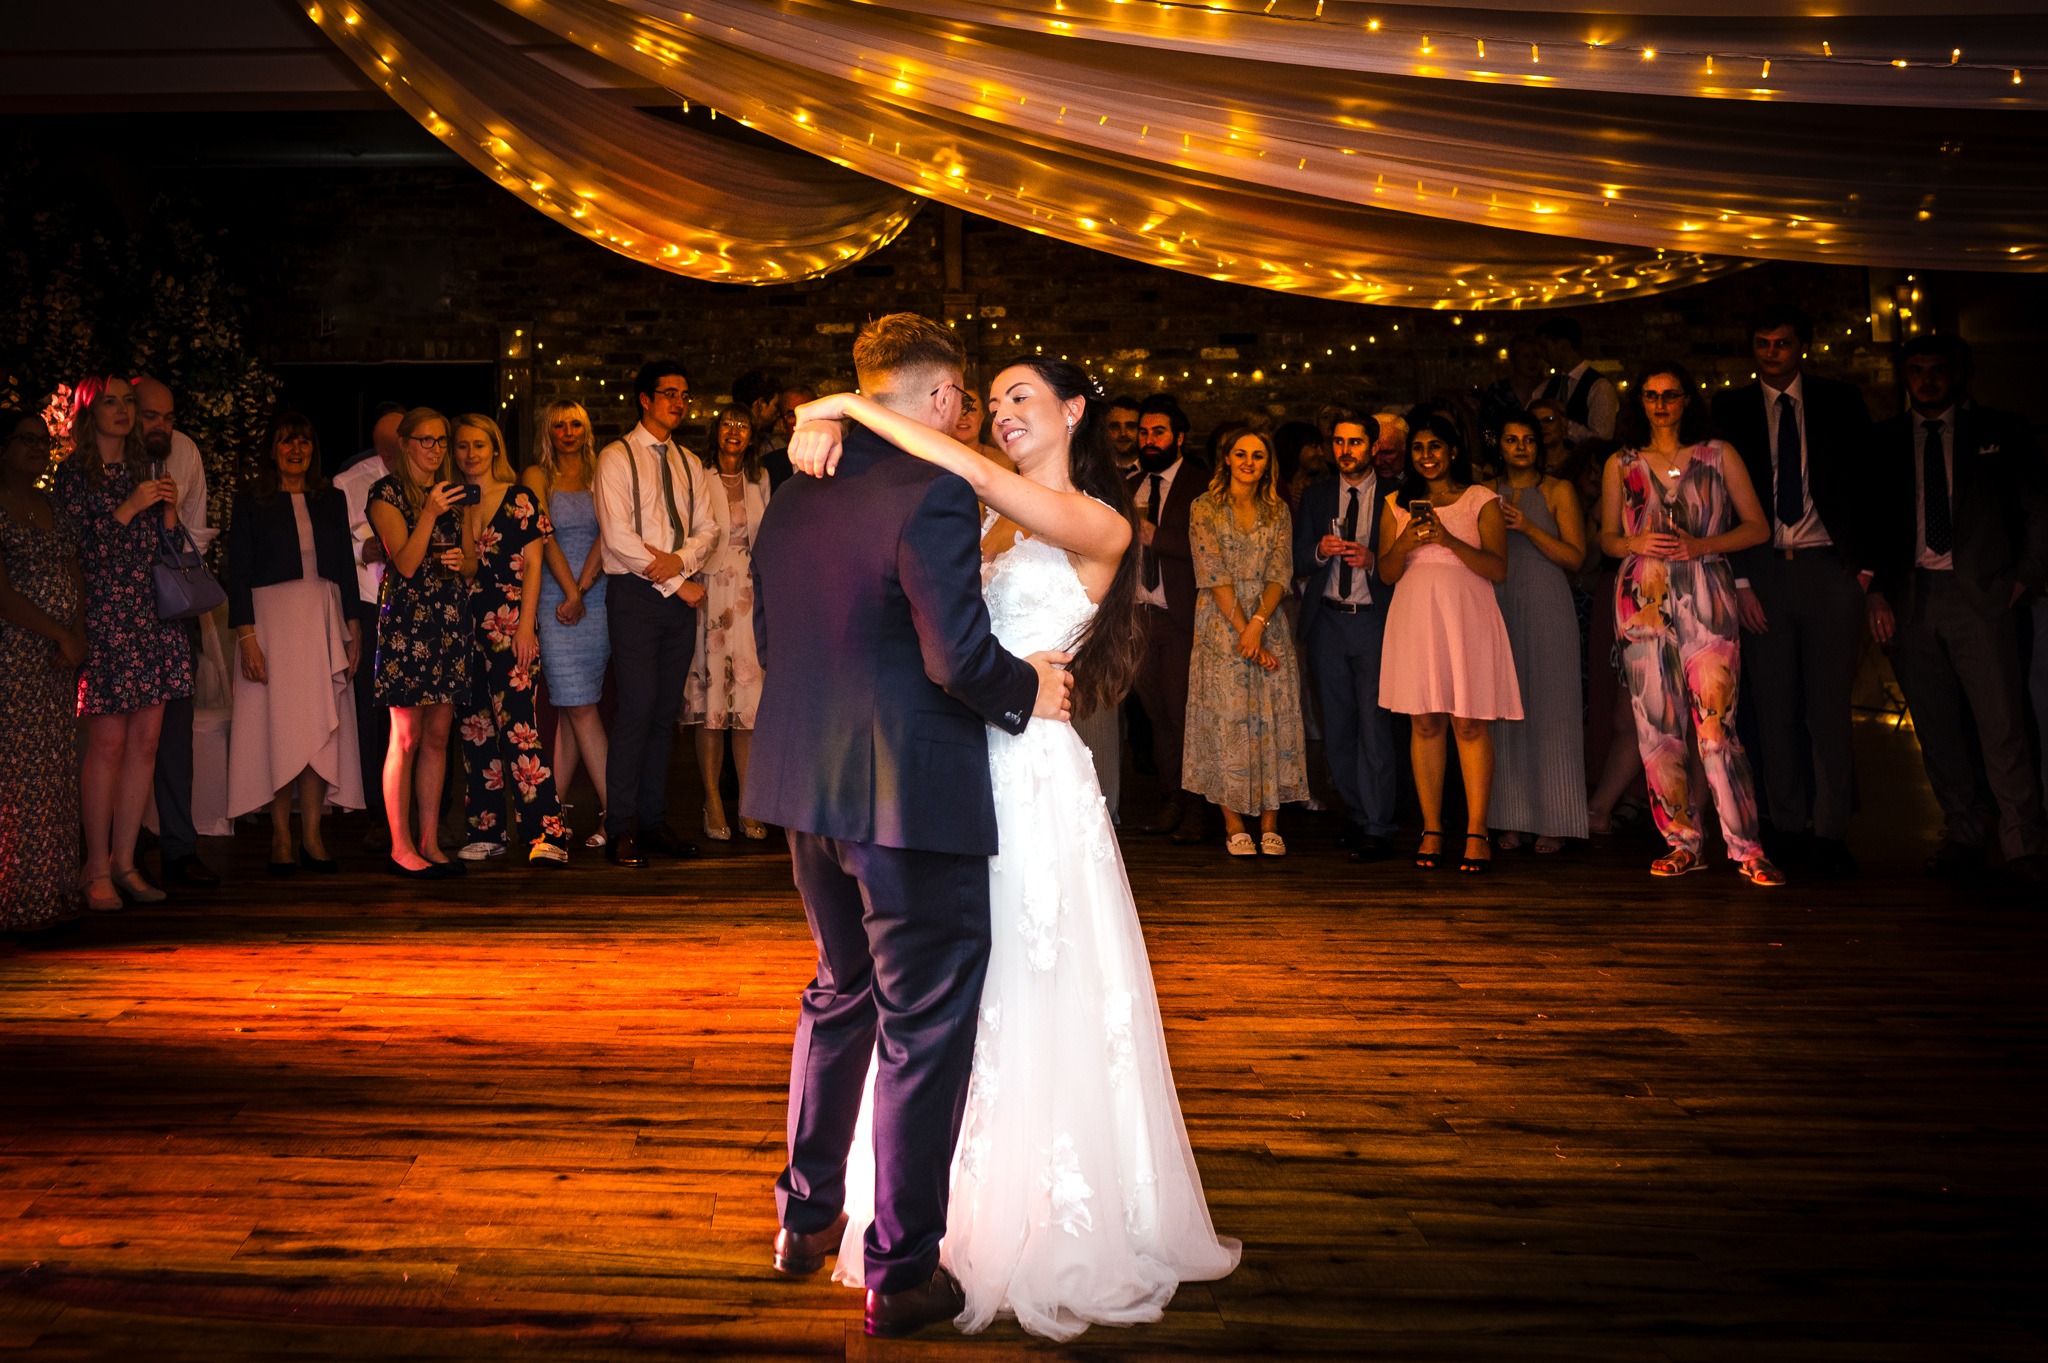 Bride and groom having their first dance at The Powder Mills Hotel, East Sussex. Wedding referrals scheme from previous clients.